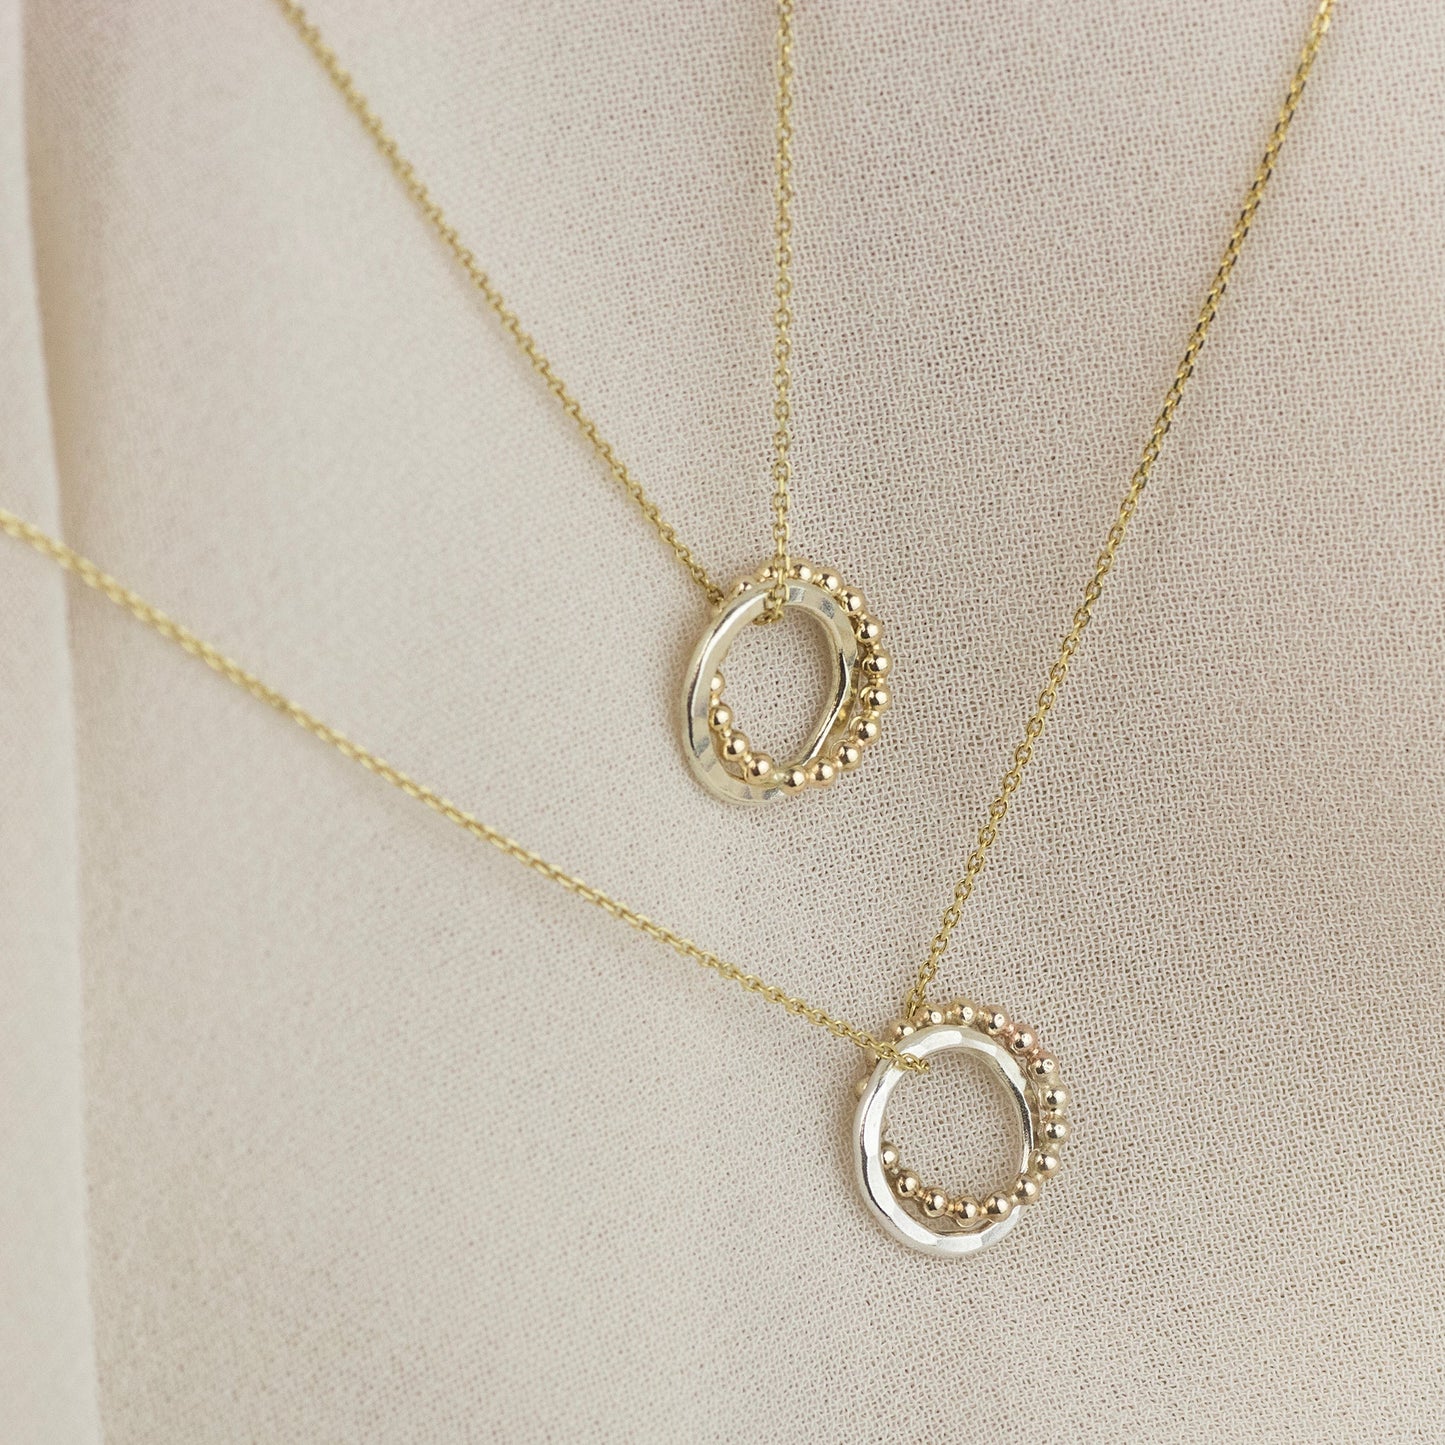 Friends Necklaces Matching Set - 9kt Gold & Silver Love Knot Necklaces